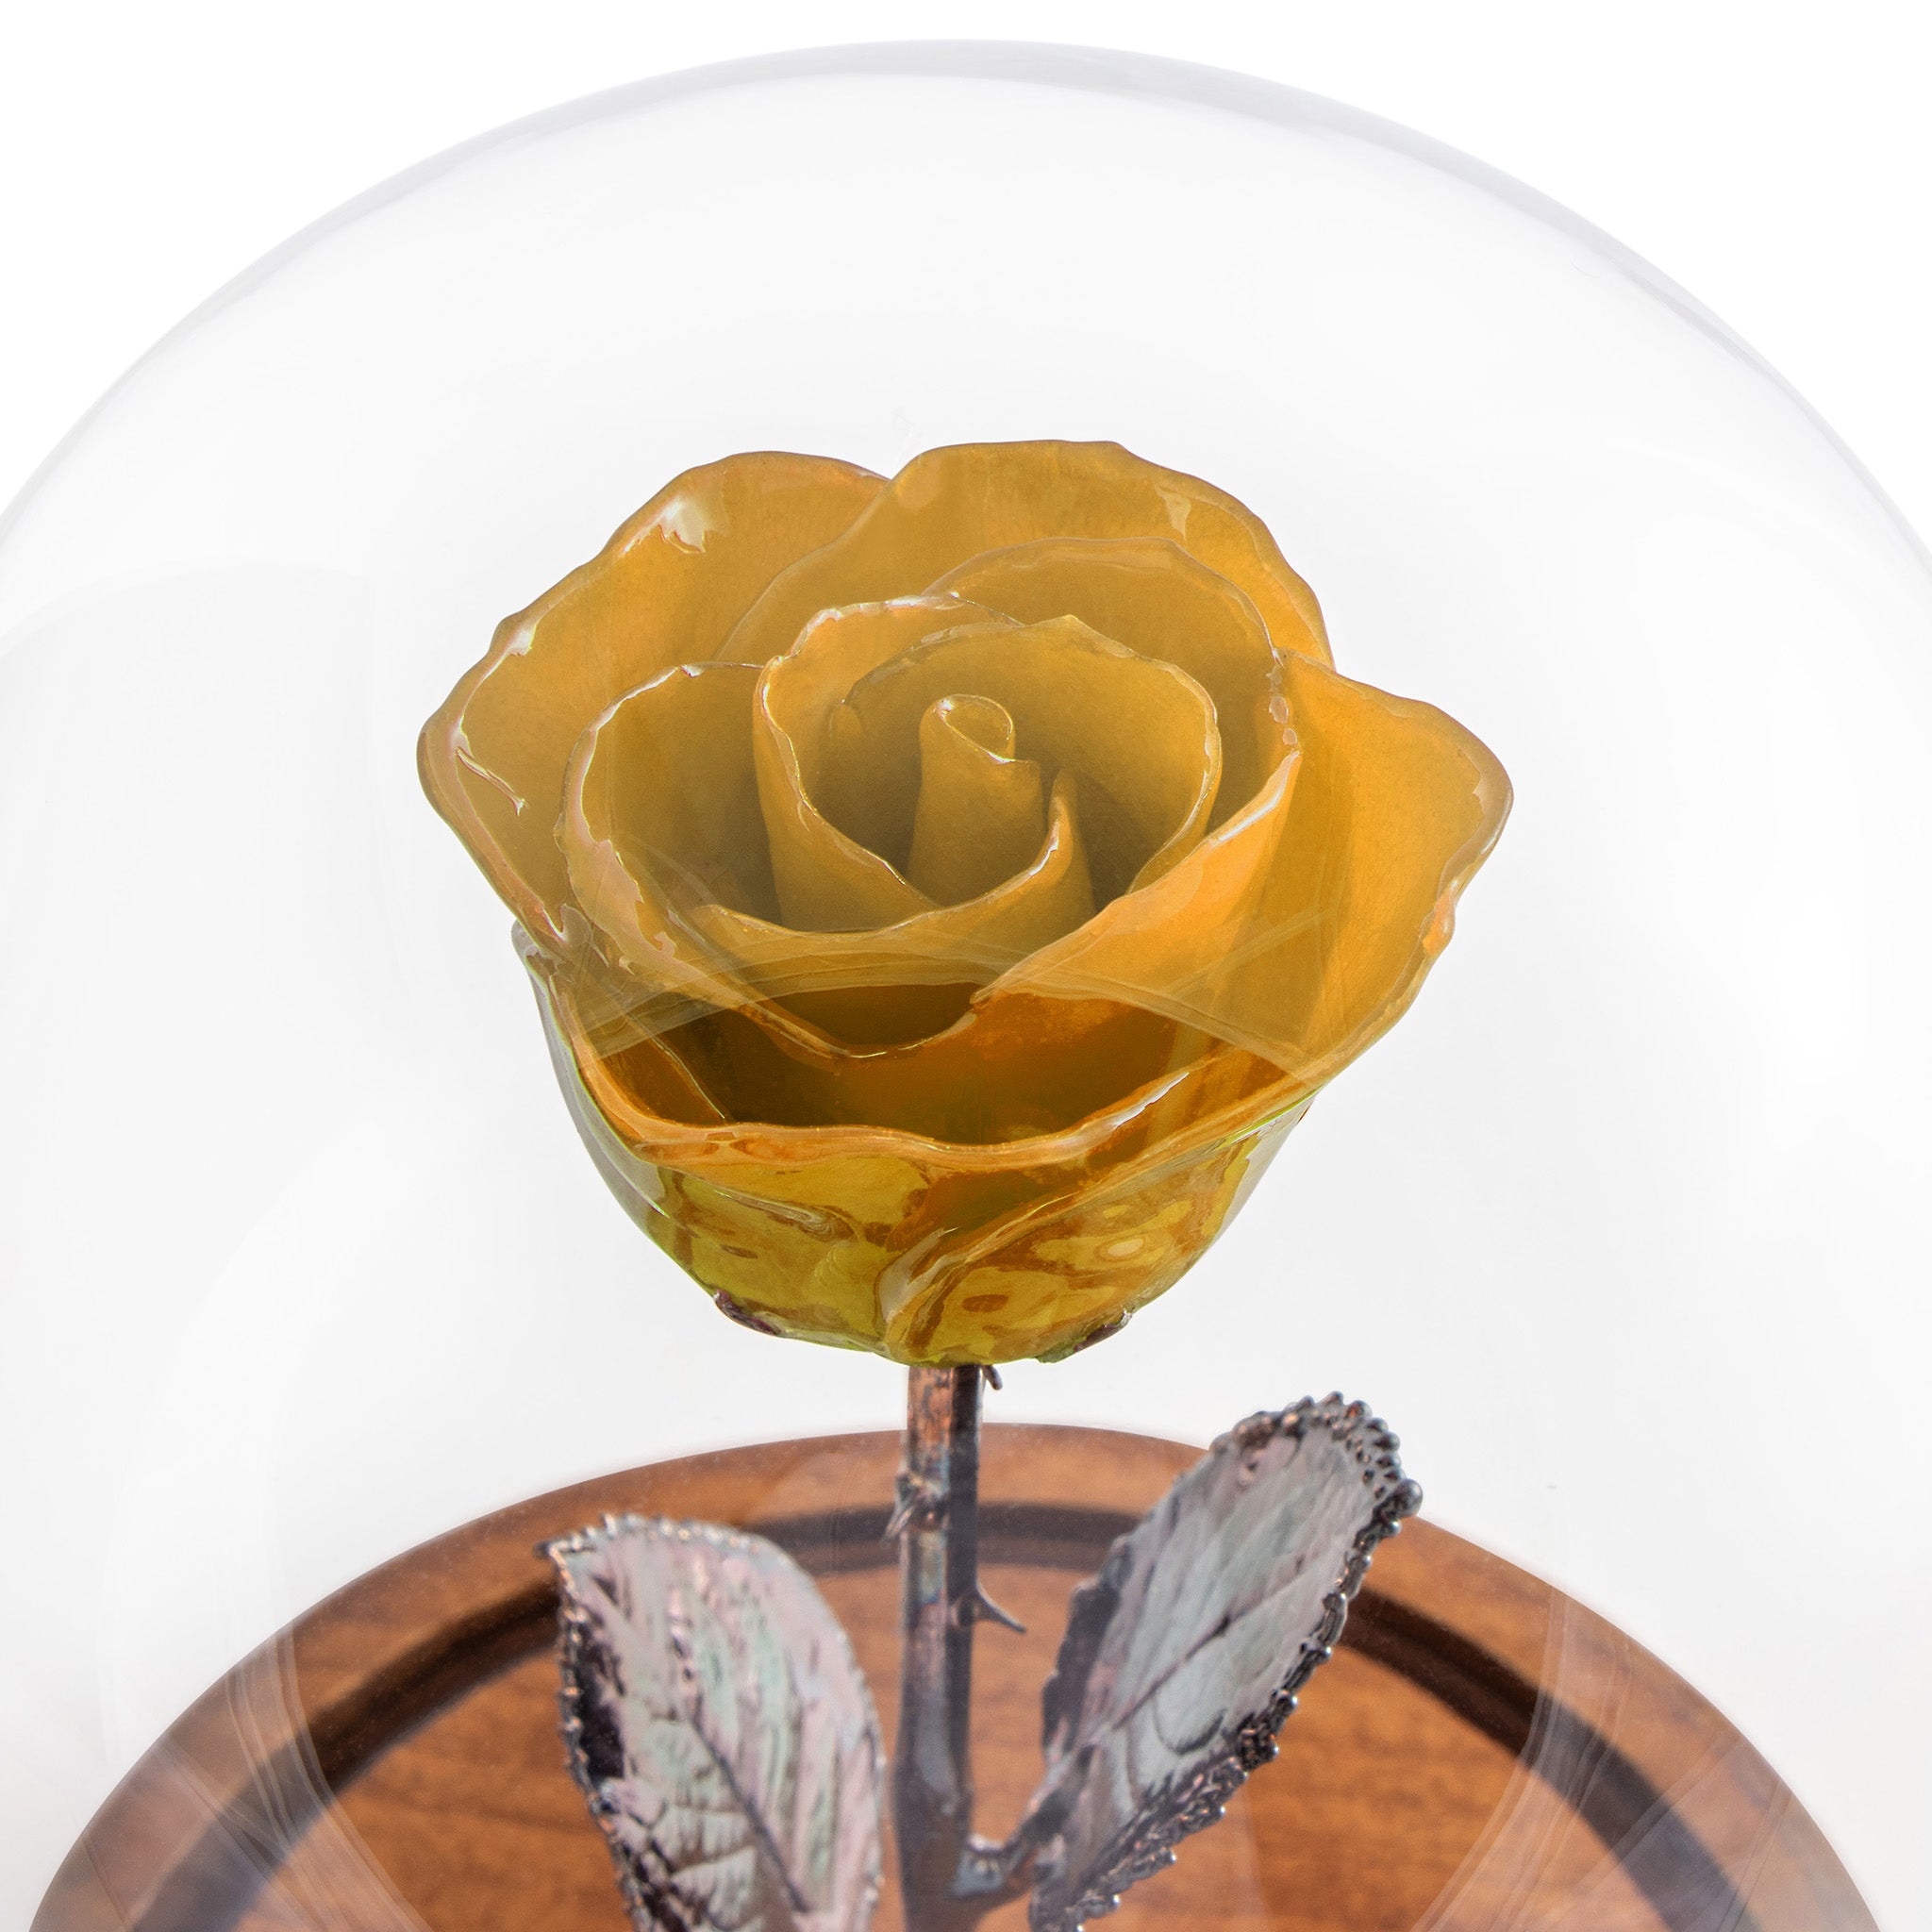 Yellow Enchanted Rose (aka Beauty & The Beast Rose) with Patina Copper Stem Mounted to A Hand Turned Solid Wood Base under a glass dome.